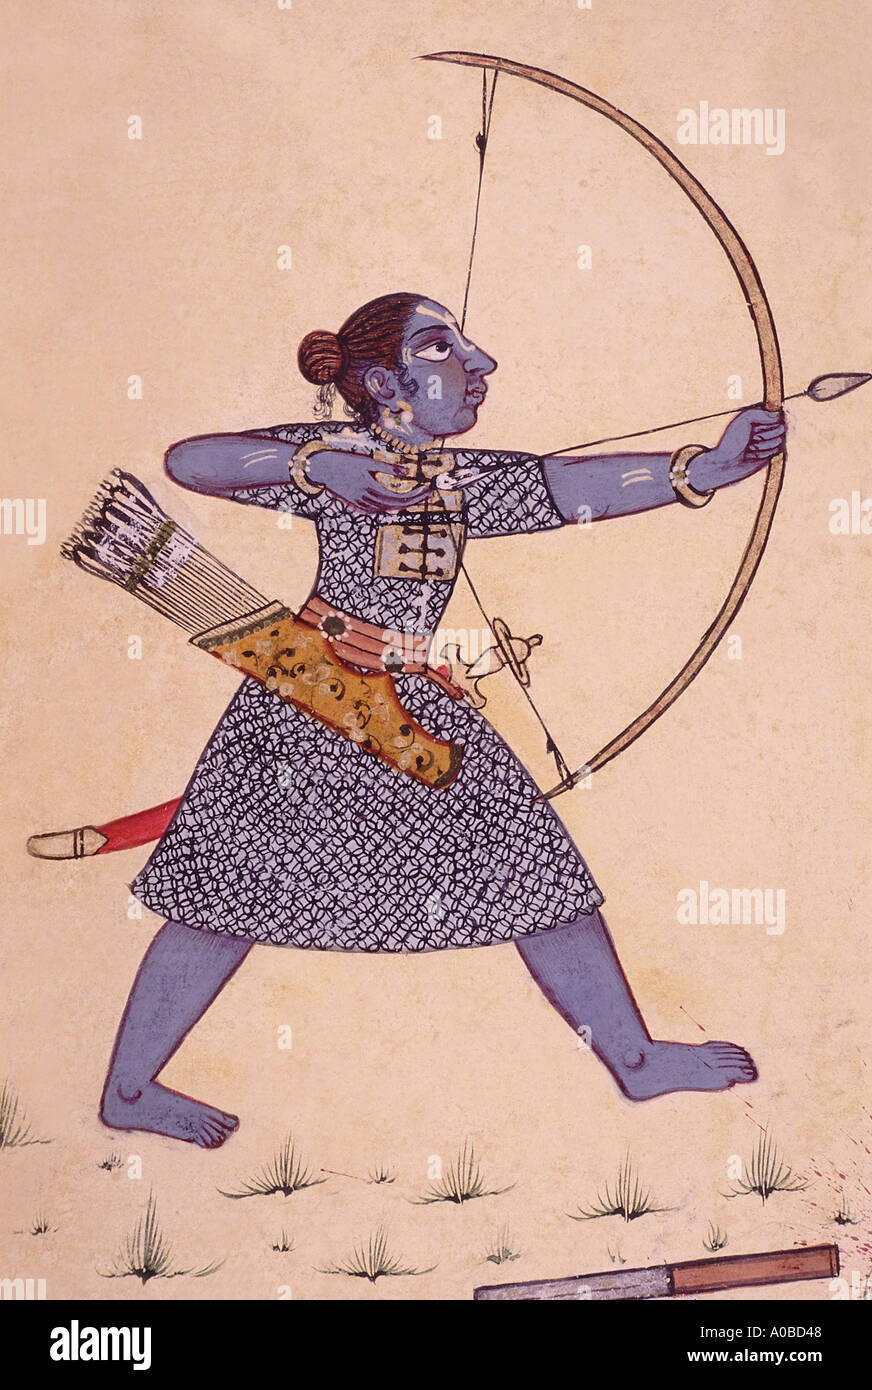 Rama. Pahari painting from the Archer collection. Dated: 1700-1710 A.D. Kulu, India. Stock Photo